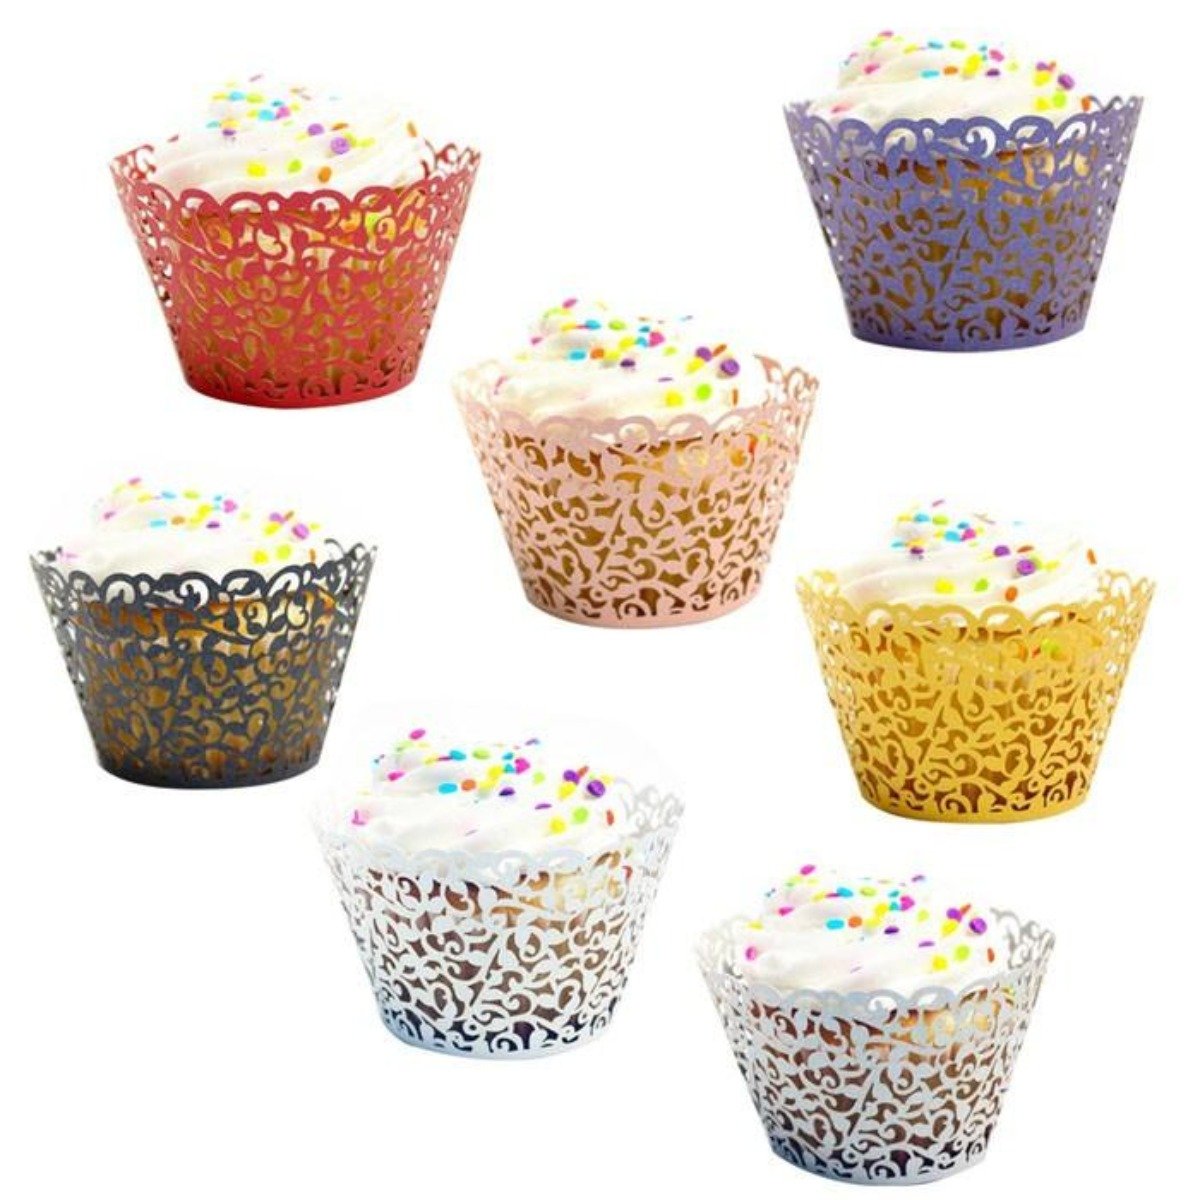 An array of wedding cupcakes in Little Vine Lace Laser Cut Cupcake Wrappers of various colors, each topped with white frosting and colorful sprinkles.